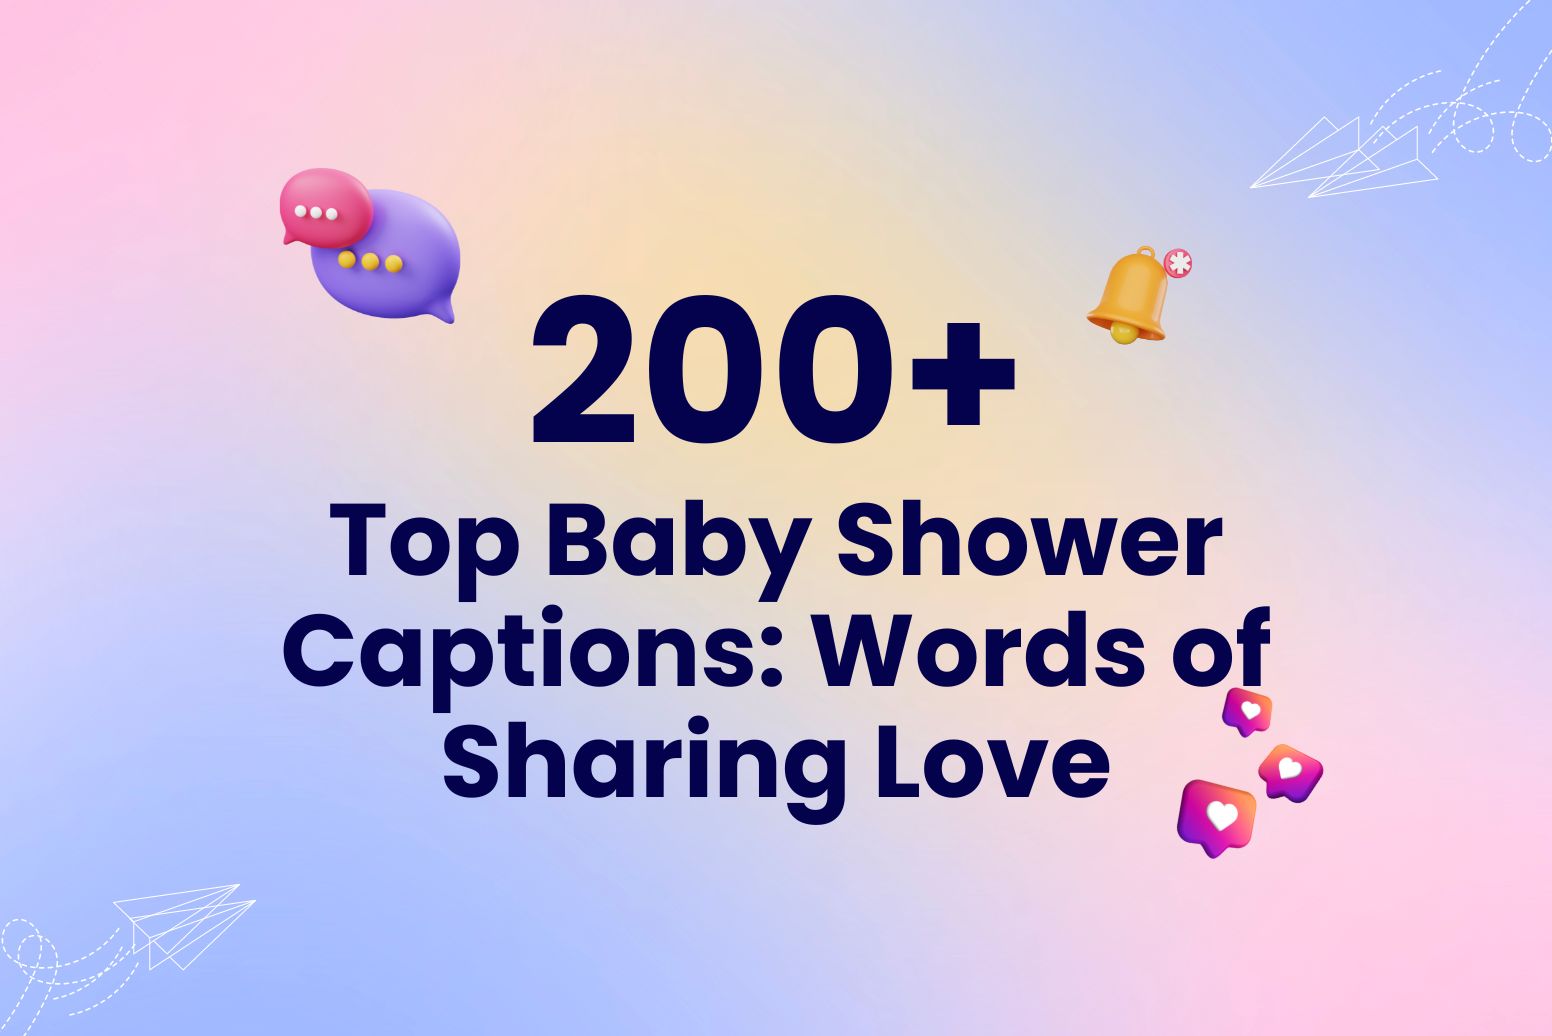 Top 200+ Baby Shower Captions Words of Sharing Love